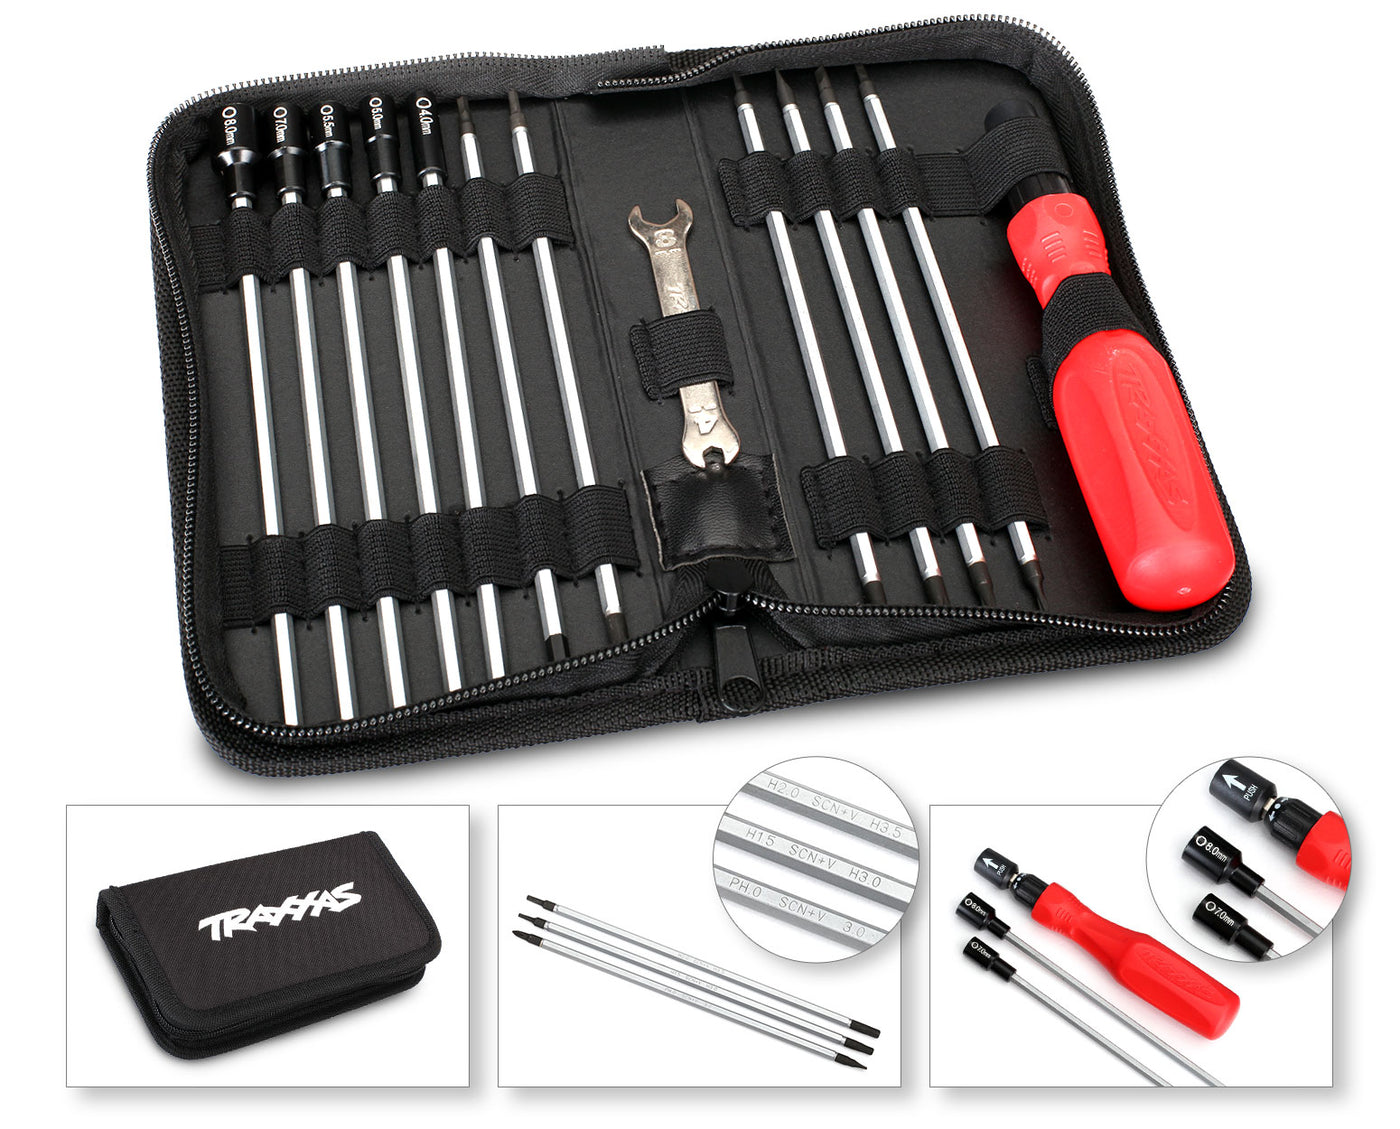 TRA 3415 TRAXXAS 3415 Tool set with pouch (includes 1